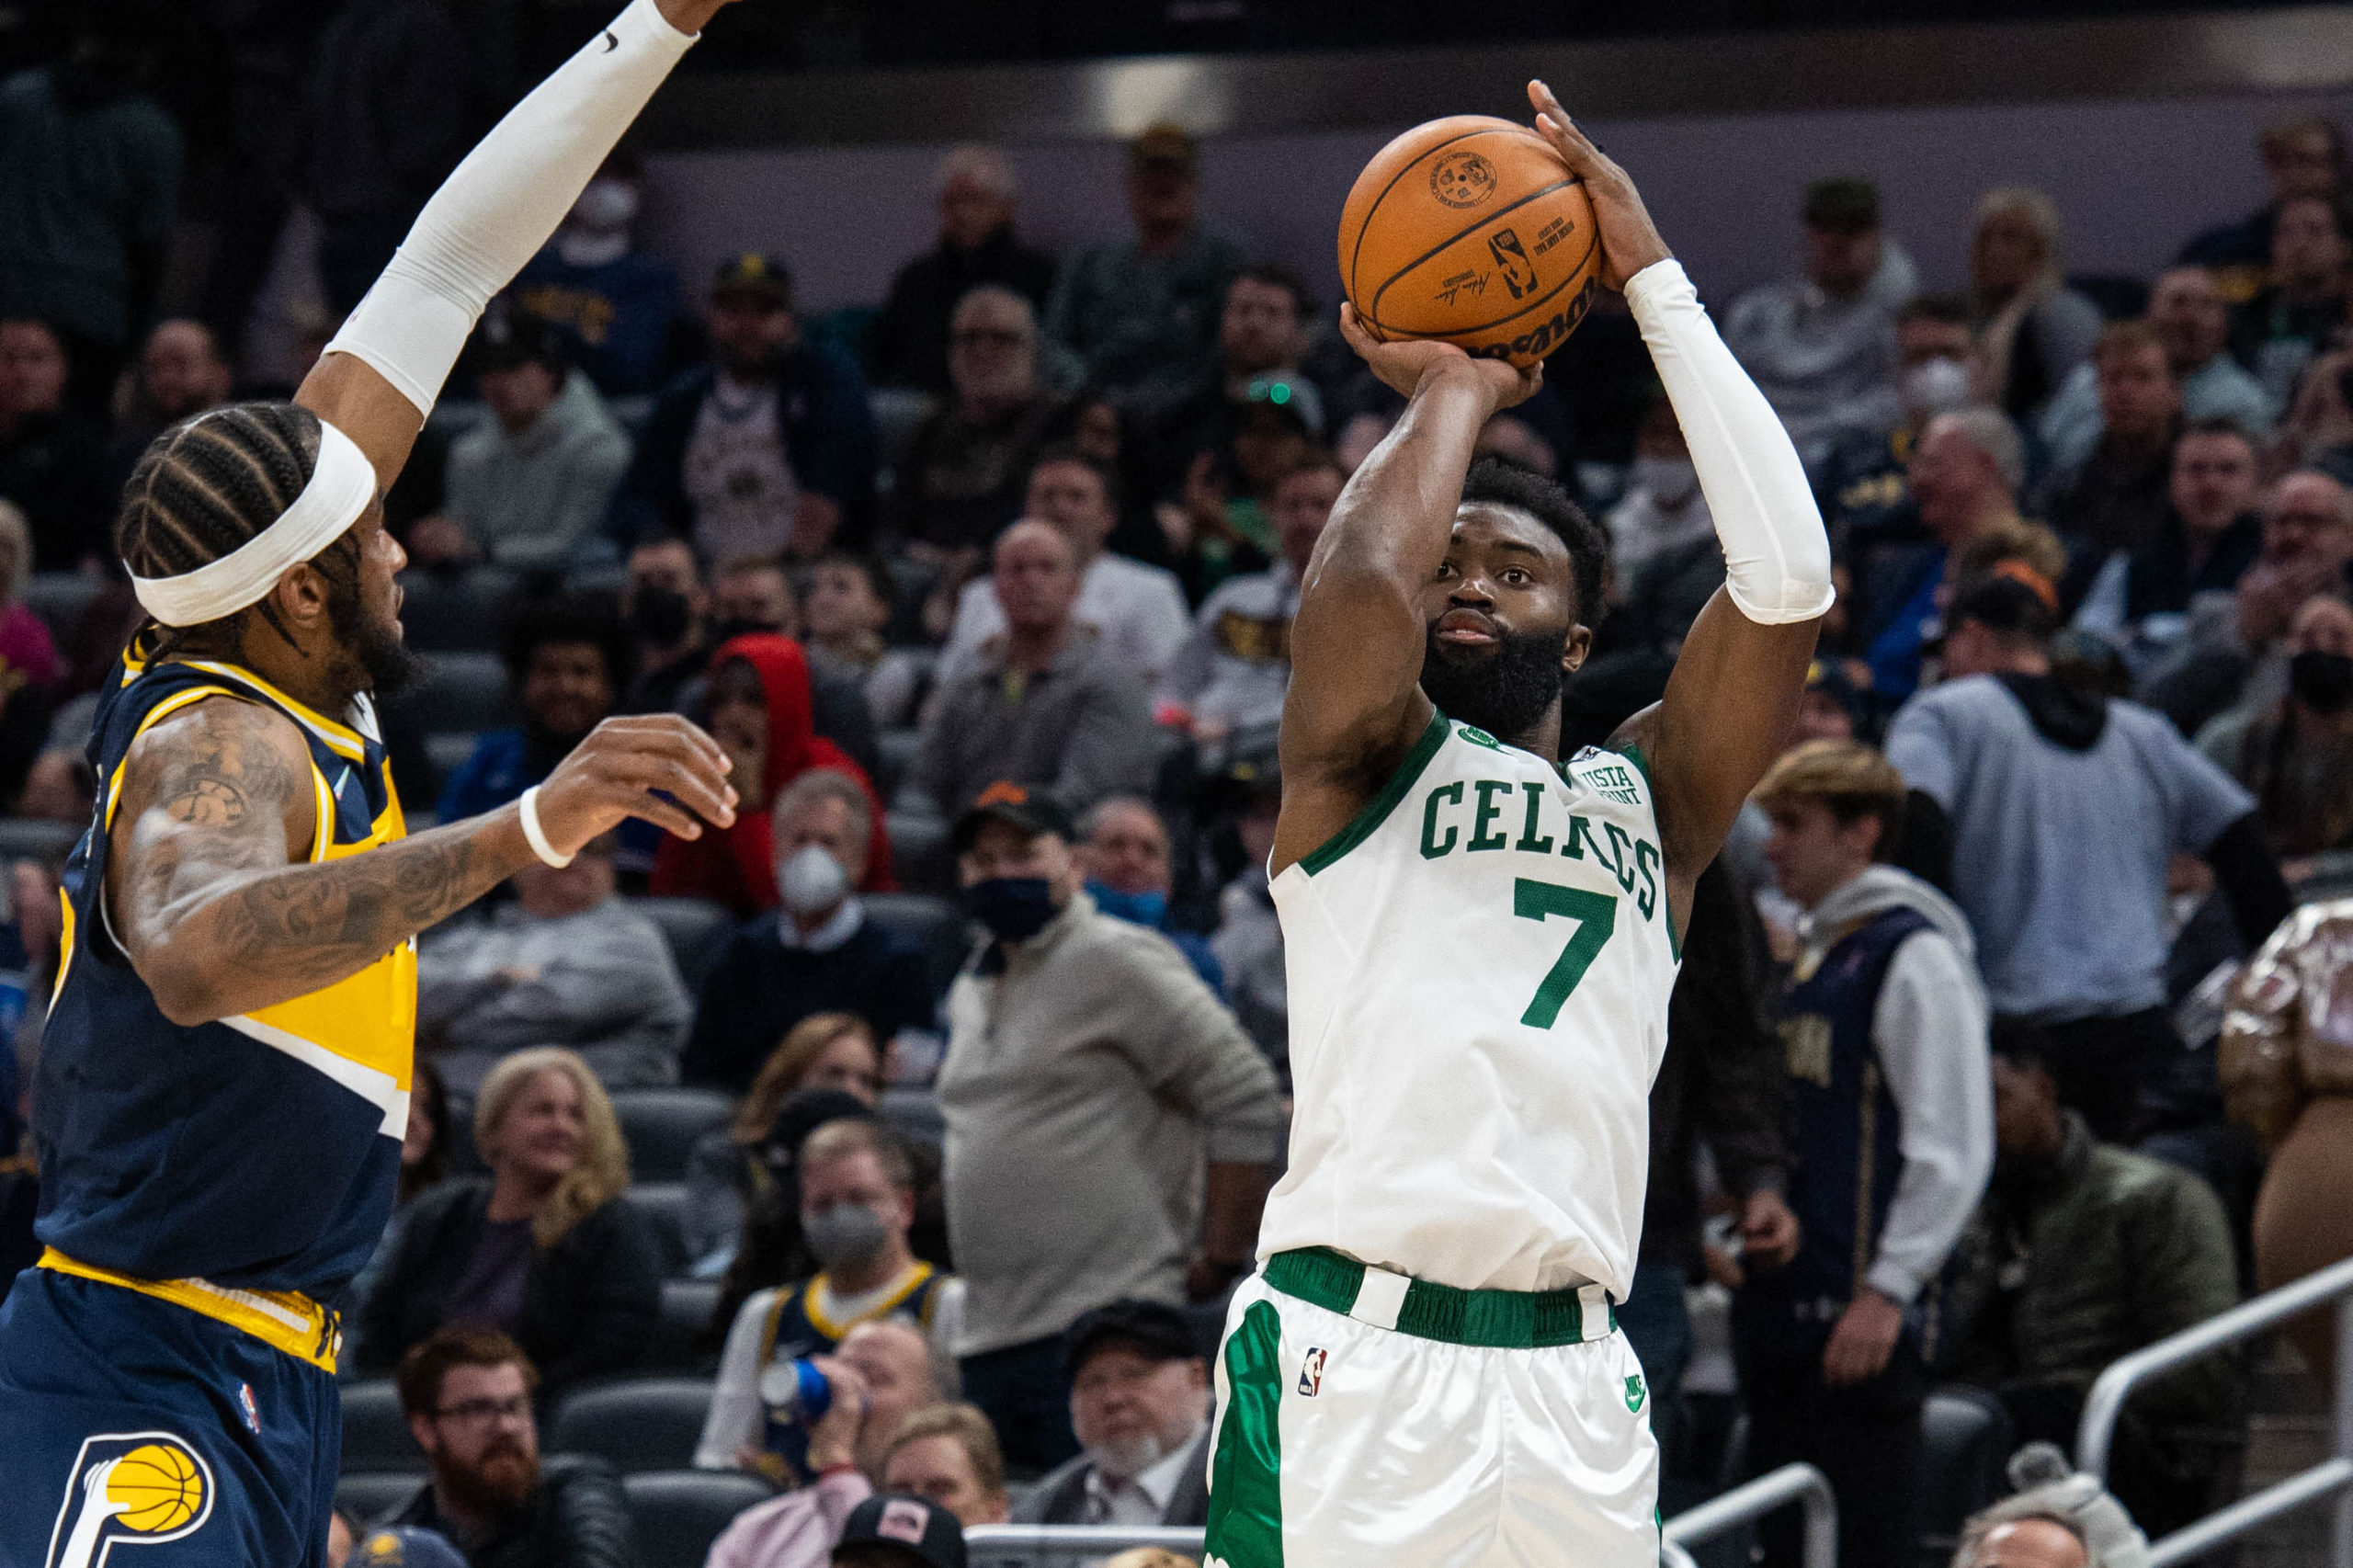  Boston Celtics guard Jaylen Brown (7) shoots the ball while Indiana Pacers forward Oshae Brissett (12) defends in the second half at Gainbridge Fieldhouse.